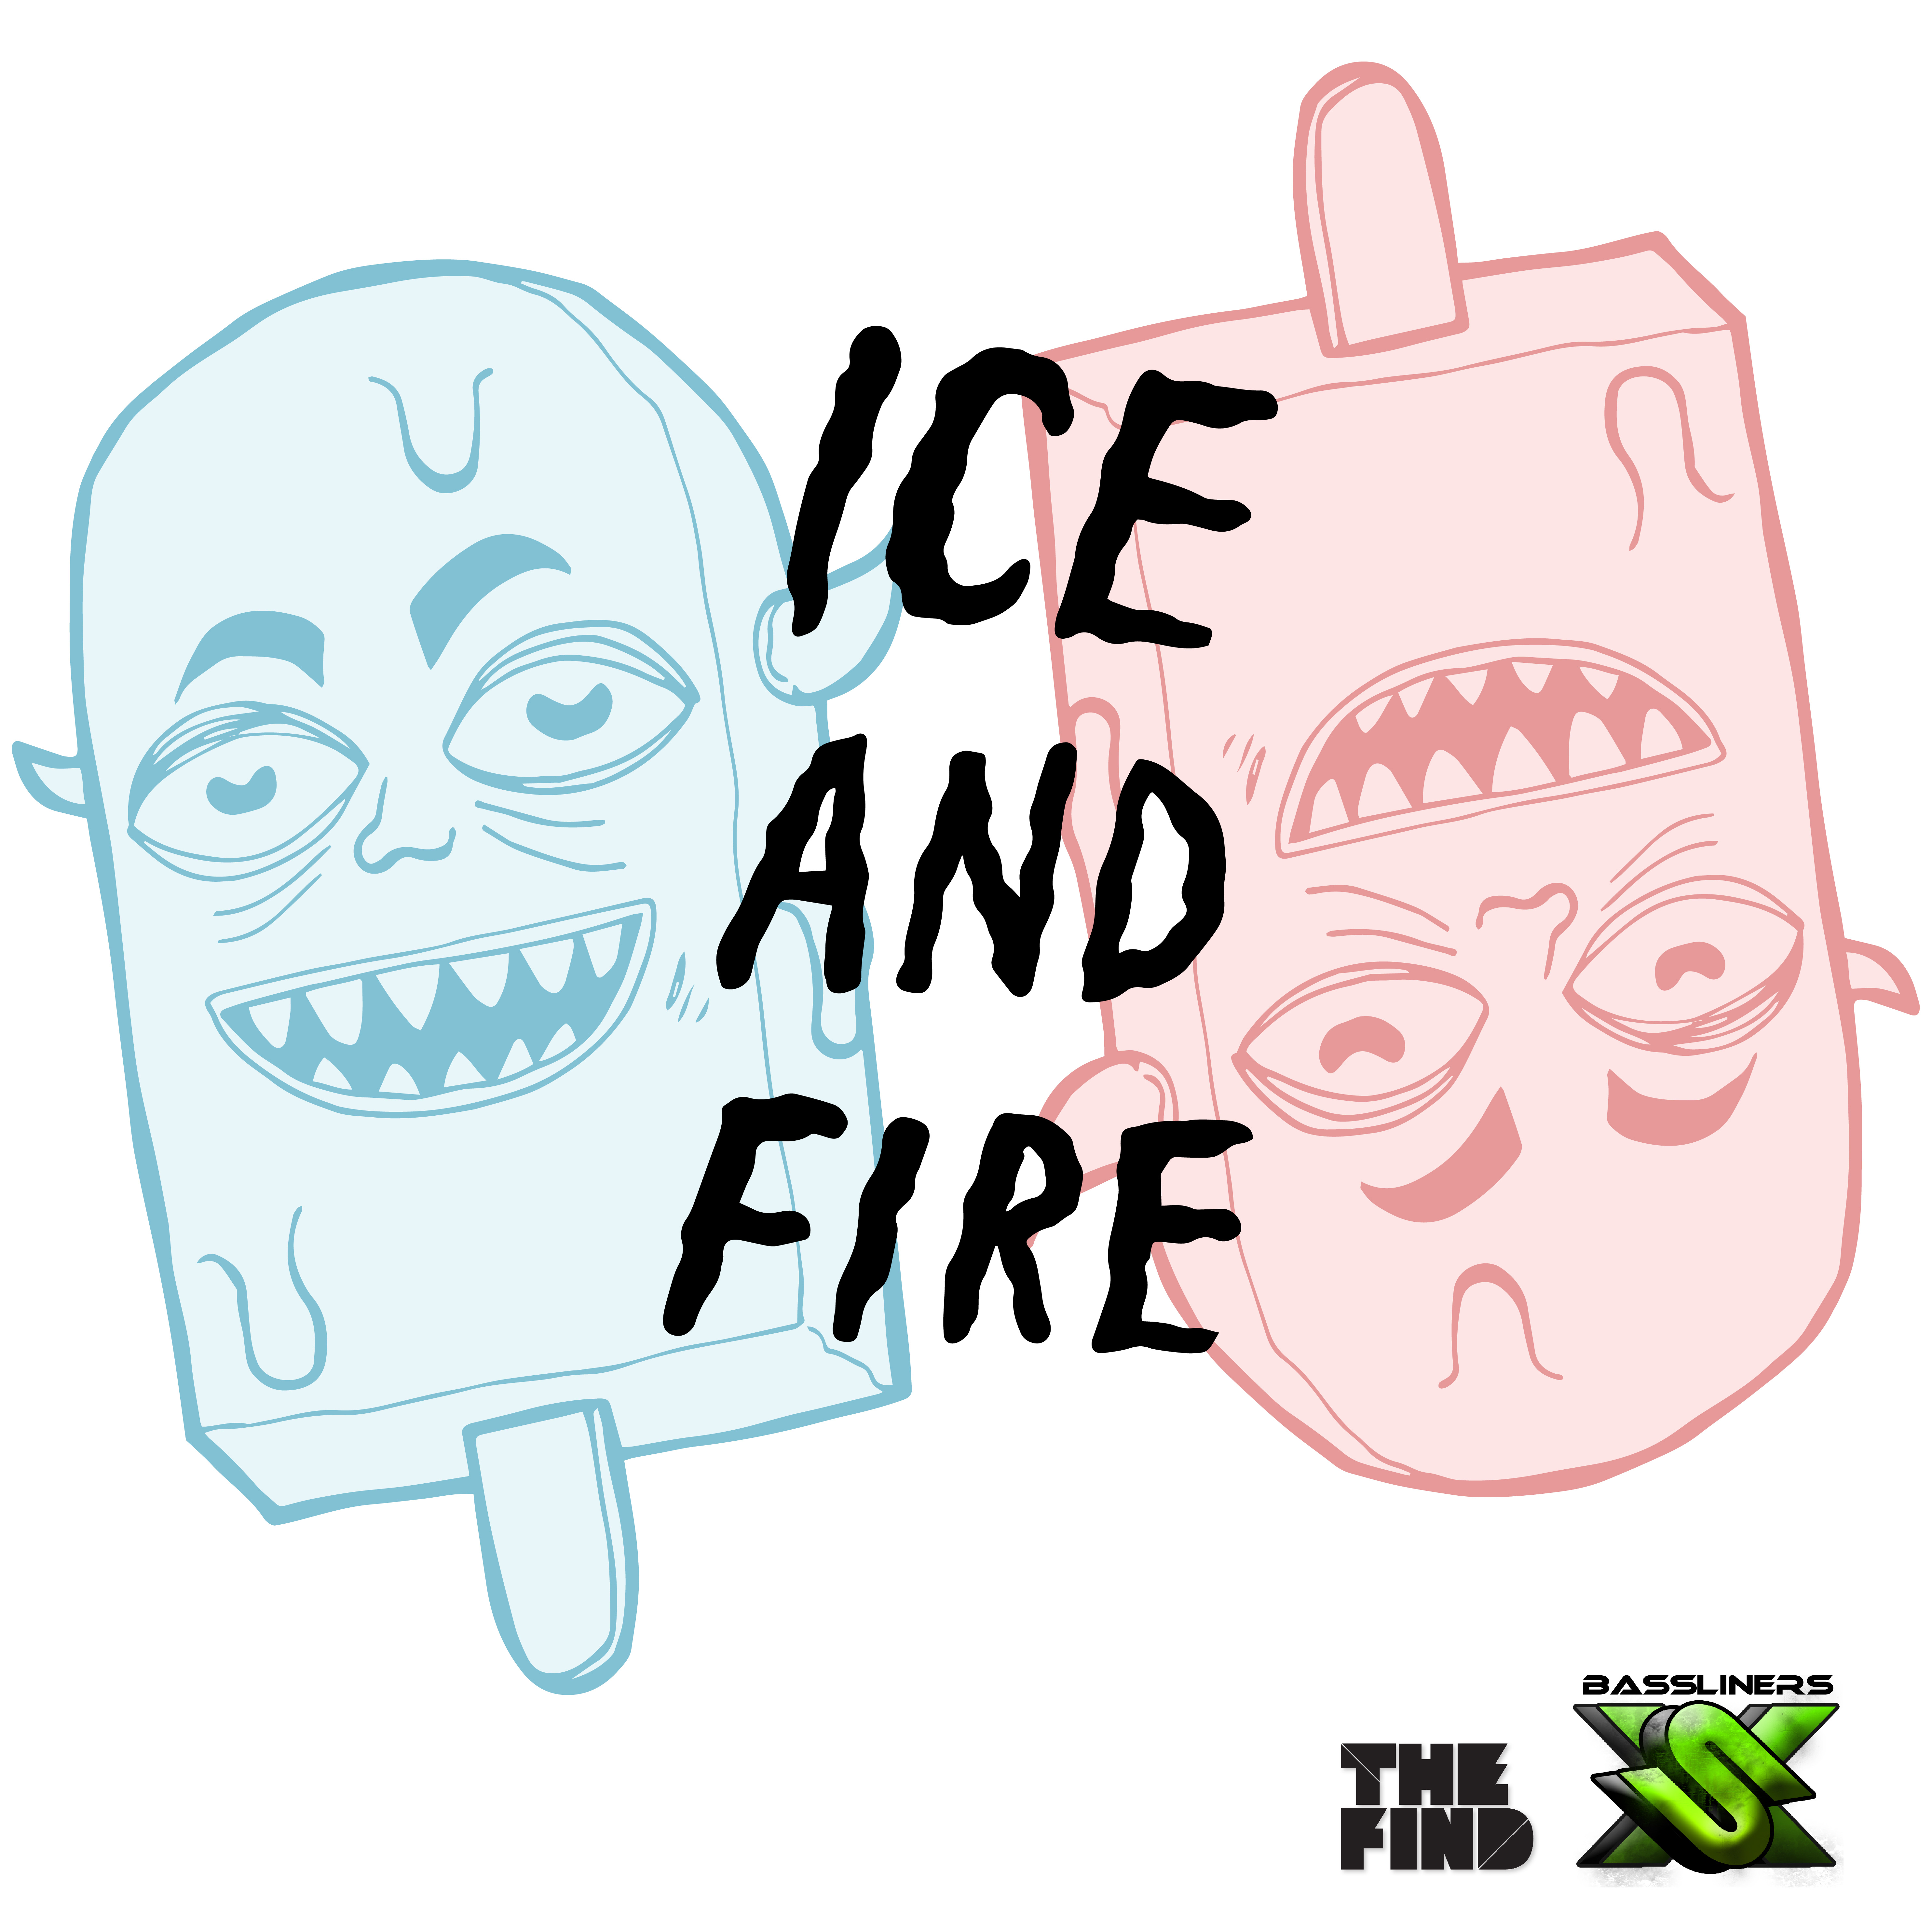 Free Download: BasslinersXS & The Find – Ice And Fire (Compilation)